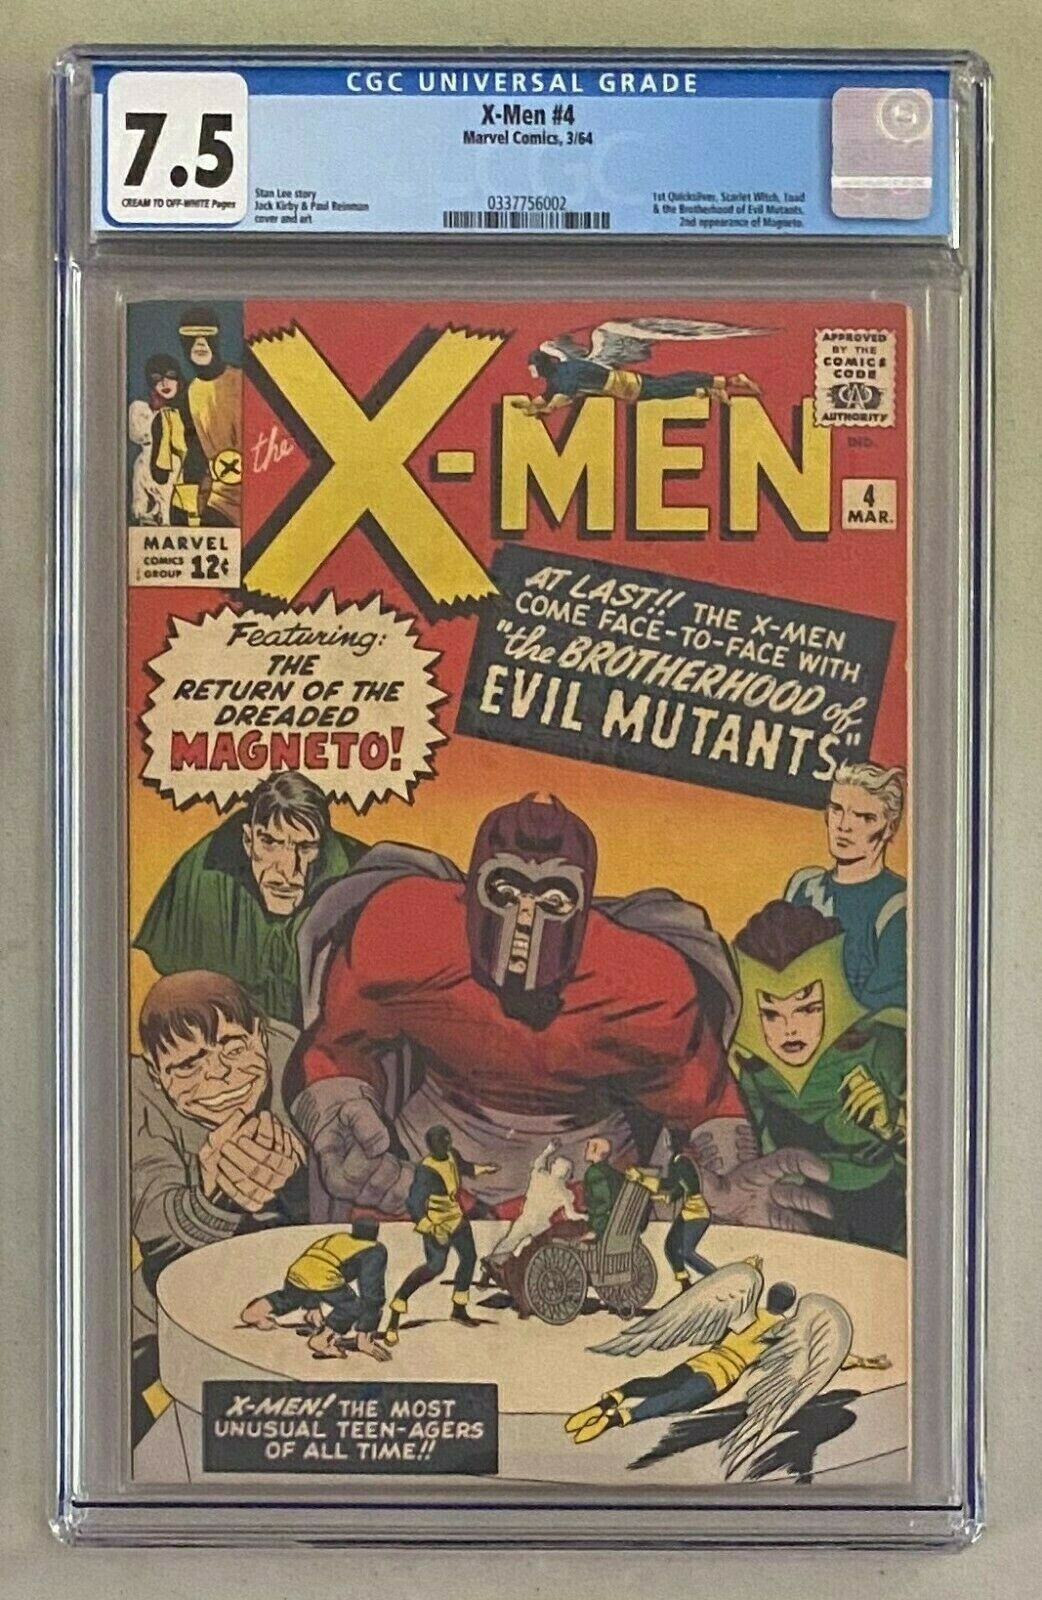 XMEN 4 Marvel 1964 CGC 75 Quicksilver Scarlet Witch and Toad 1st Appearance